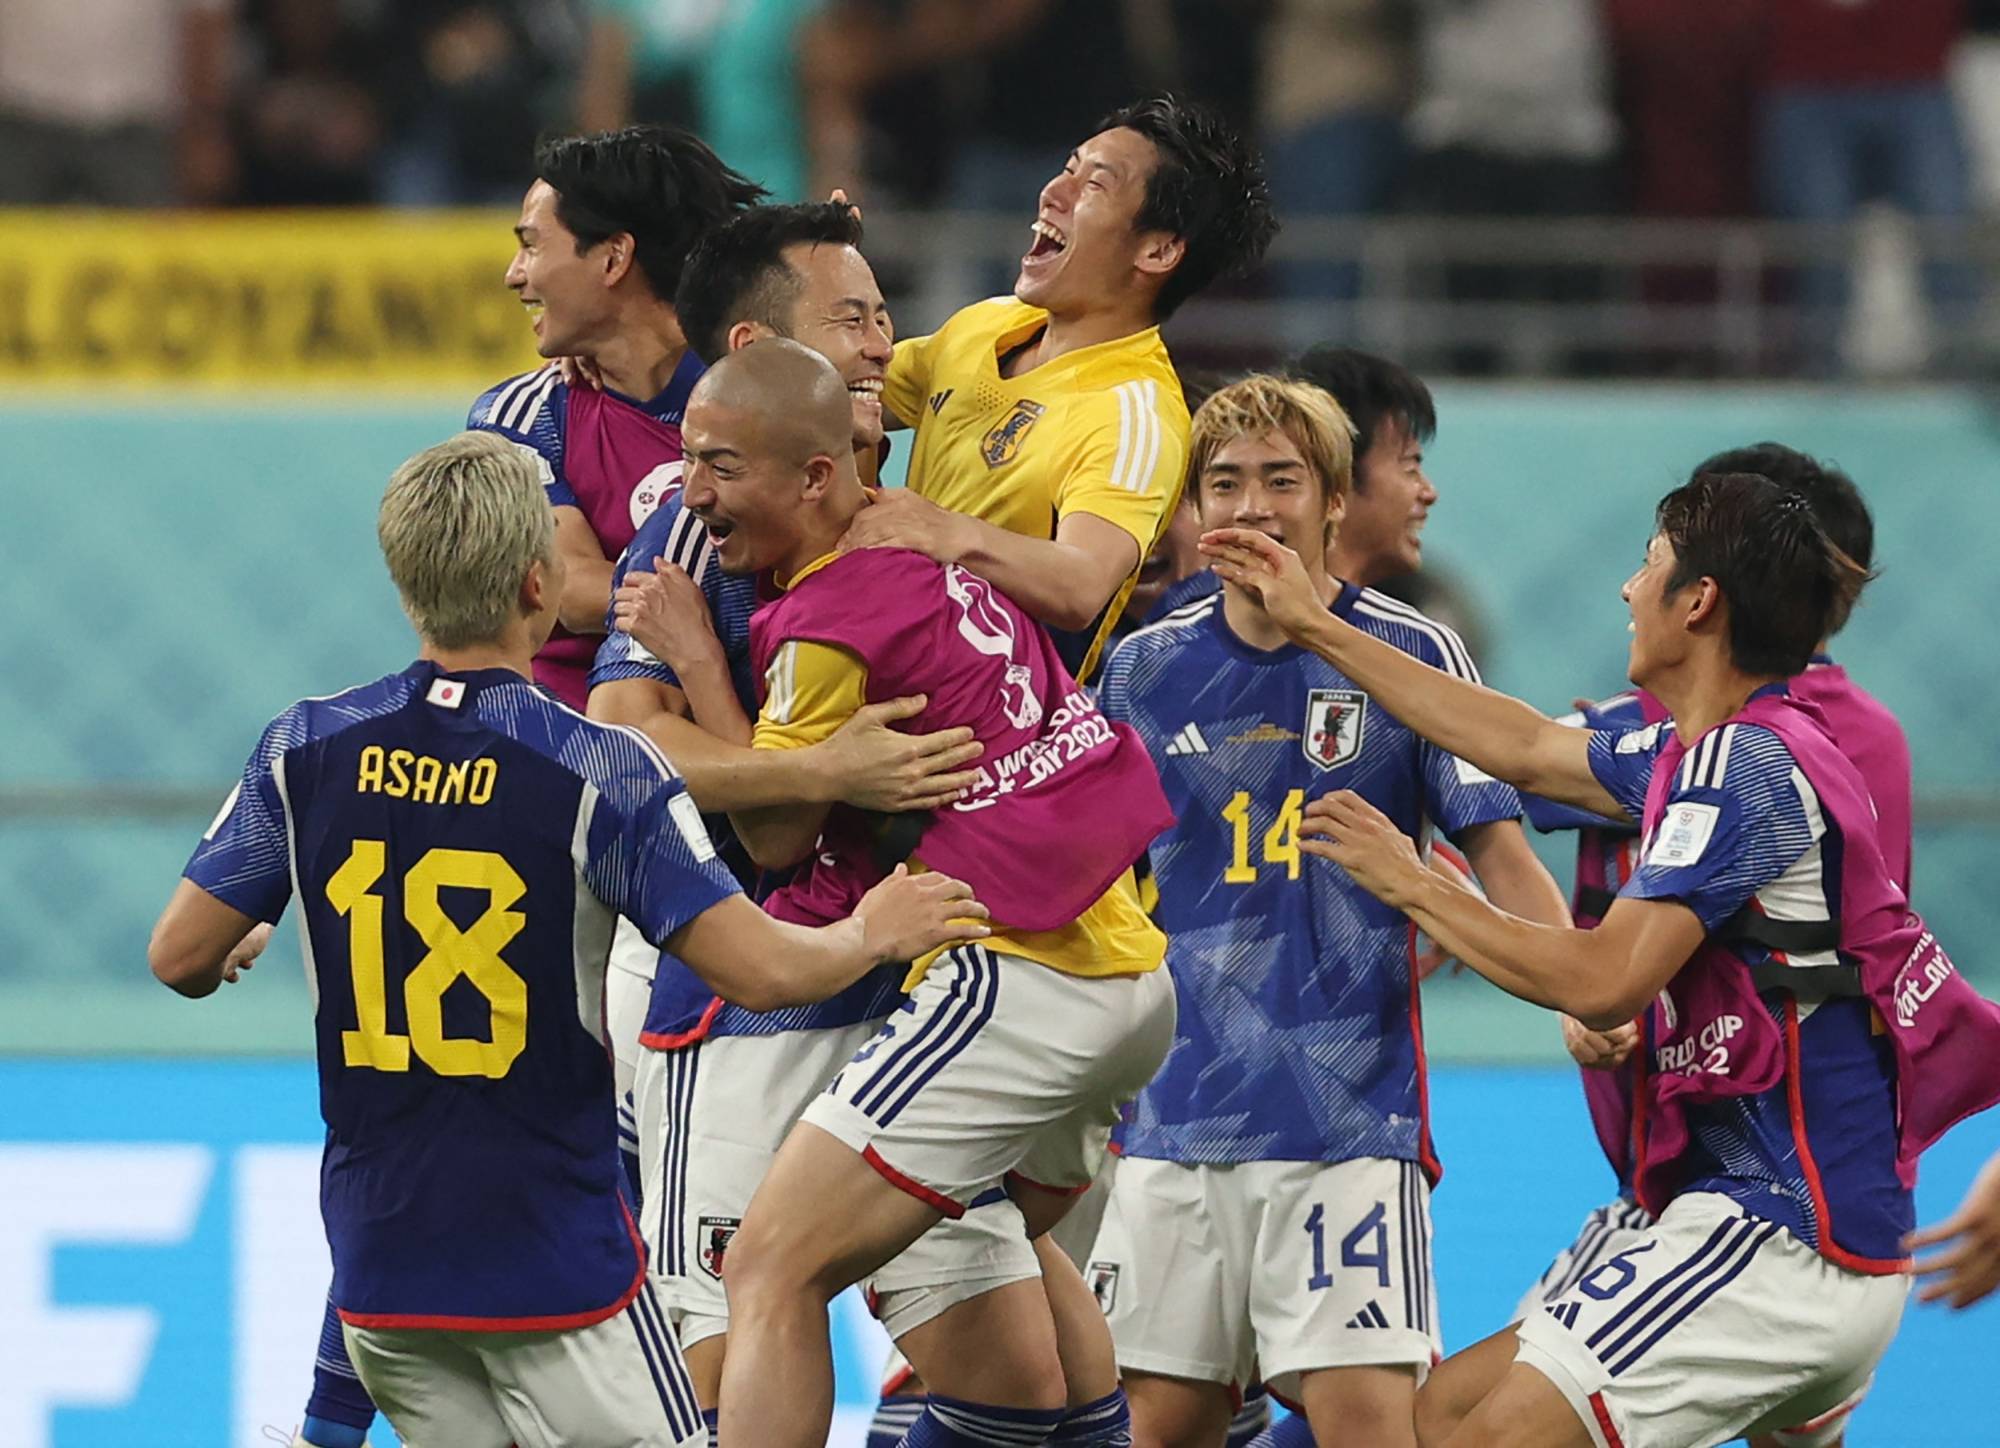 Japan defeats Spain to advance in shock World Cup upset